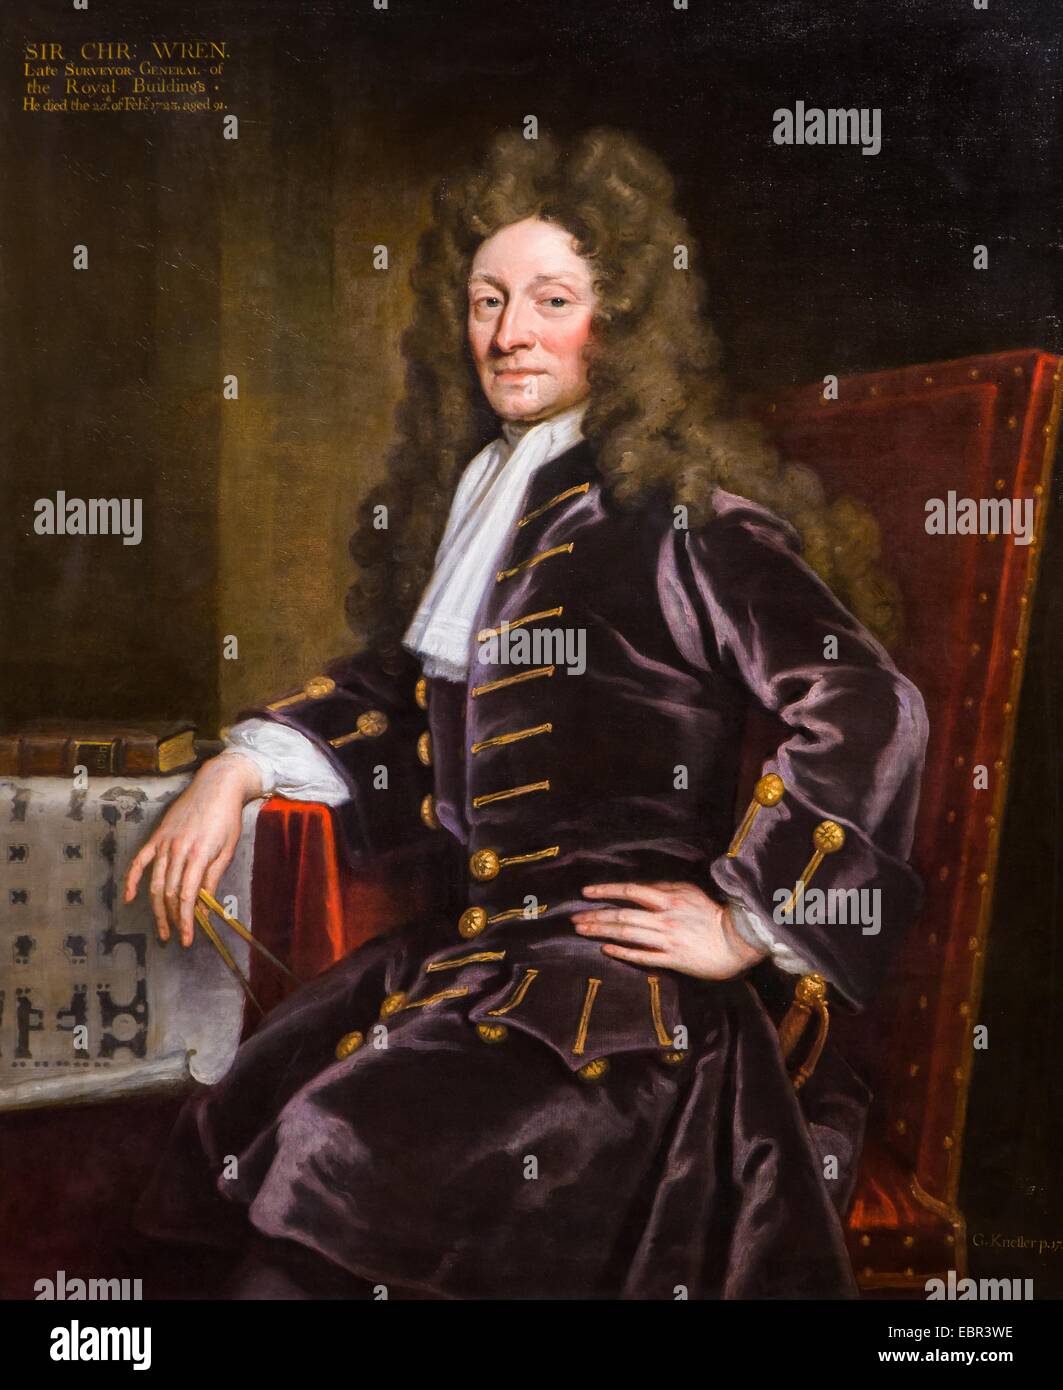 ActiveMuseum 0003721.jpg / Sir Christopher Wren, architect and scientist, 1711 - Sir Godfrey Kneller Oil on canvas 22/01/2014  -   / 18th century Collection / Active Museum Stock Photo